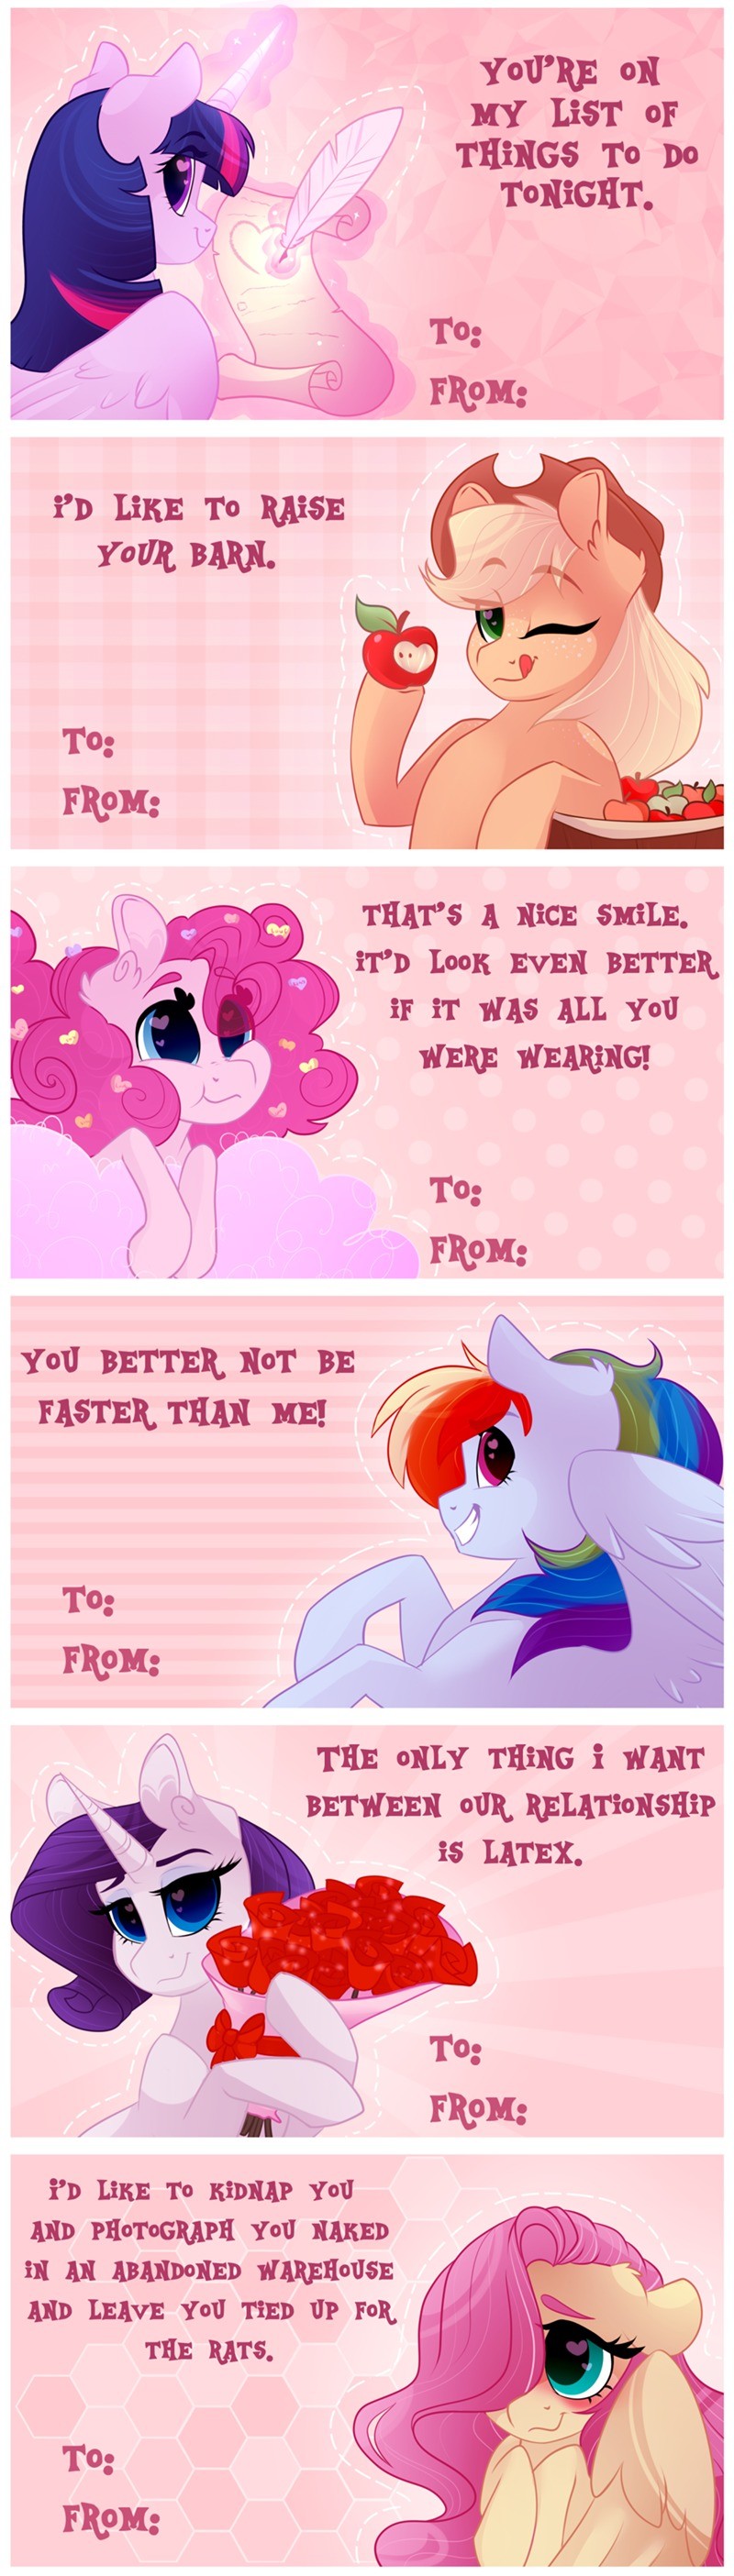 Hearts and Hooves Day cards. . MY HST of To no rotmg' r. tr' Loon EVER BETTER. if IT WAS All YOU Yul "TTER, ttoo " run my is LATEX. Plt ma To man? You All» Pleo